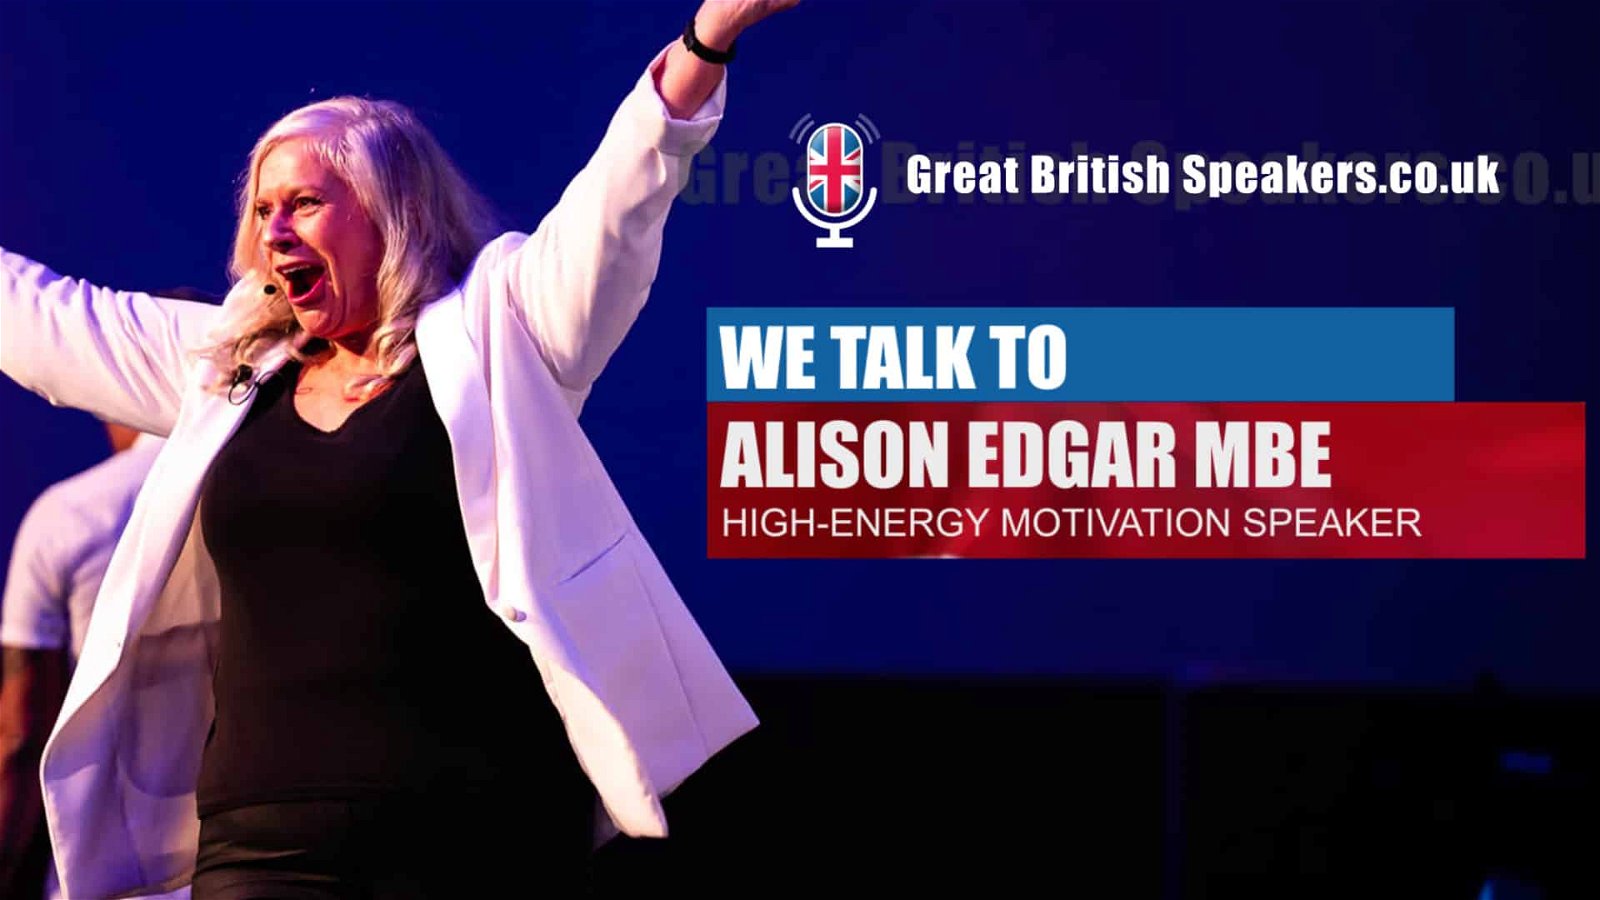 Alison Edgar MBE, performance and communications speaker at Great British Speakers